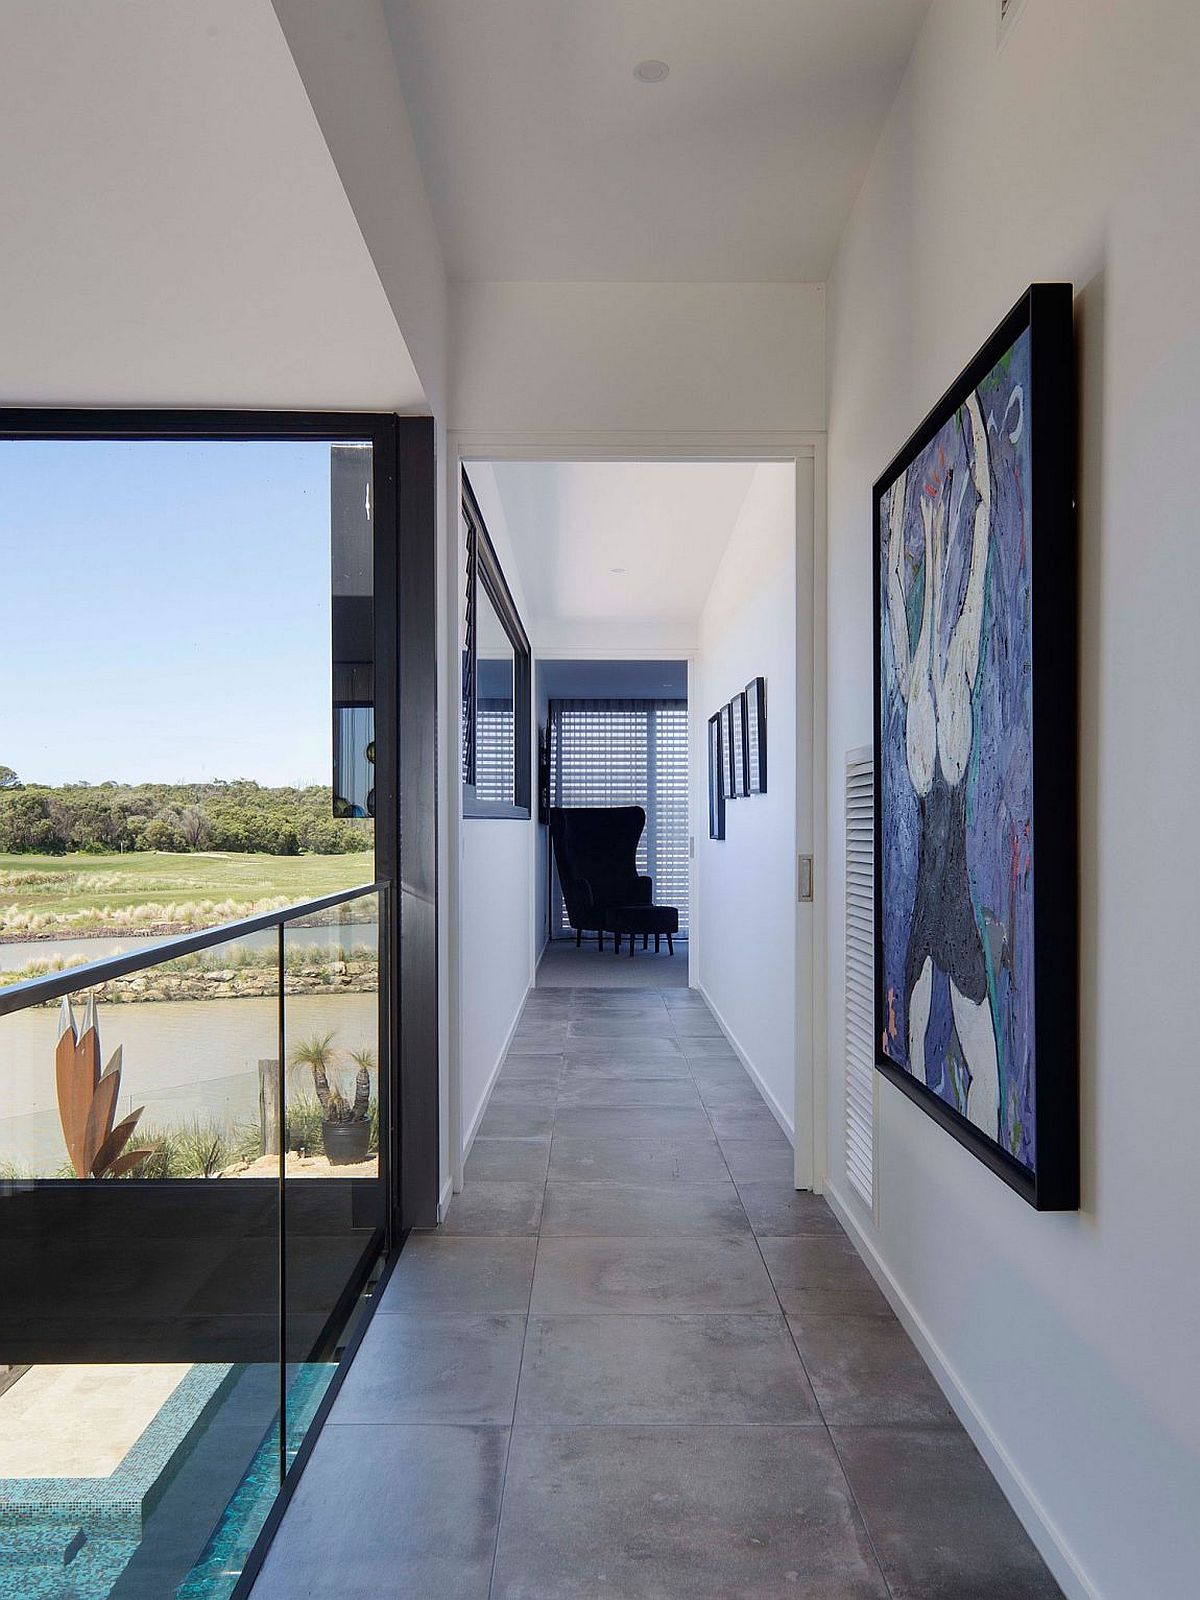 Corridor-of-the-home-with-a-view-of-the-pool-and-garden-below